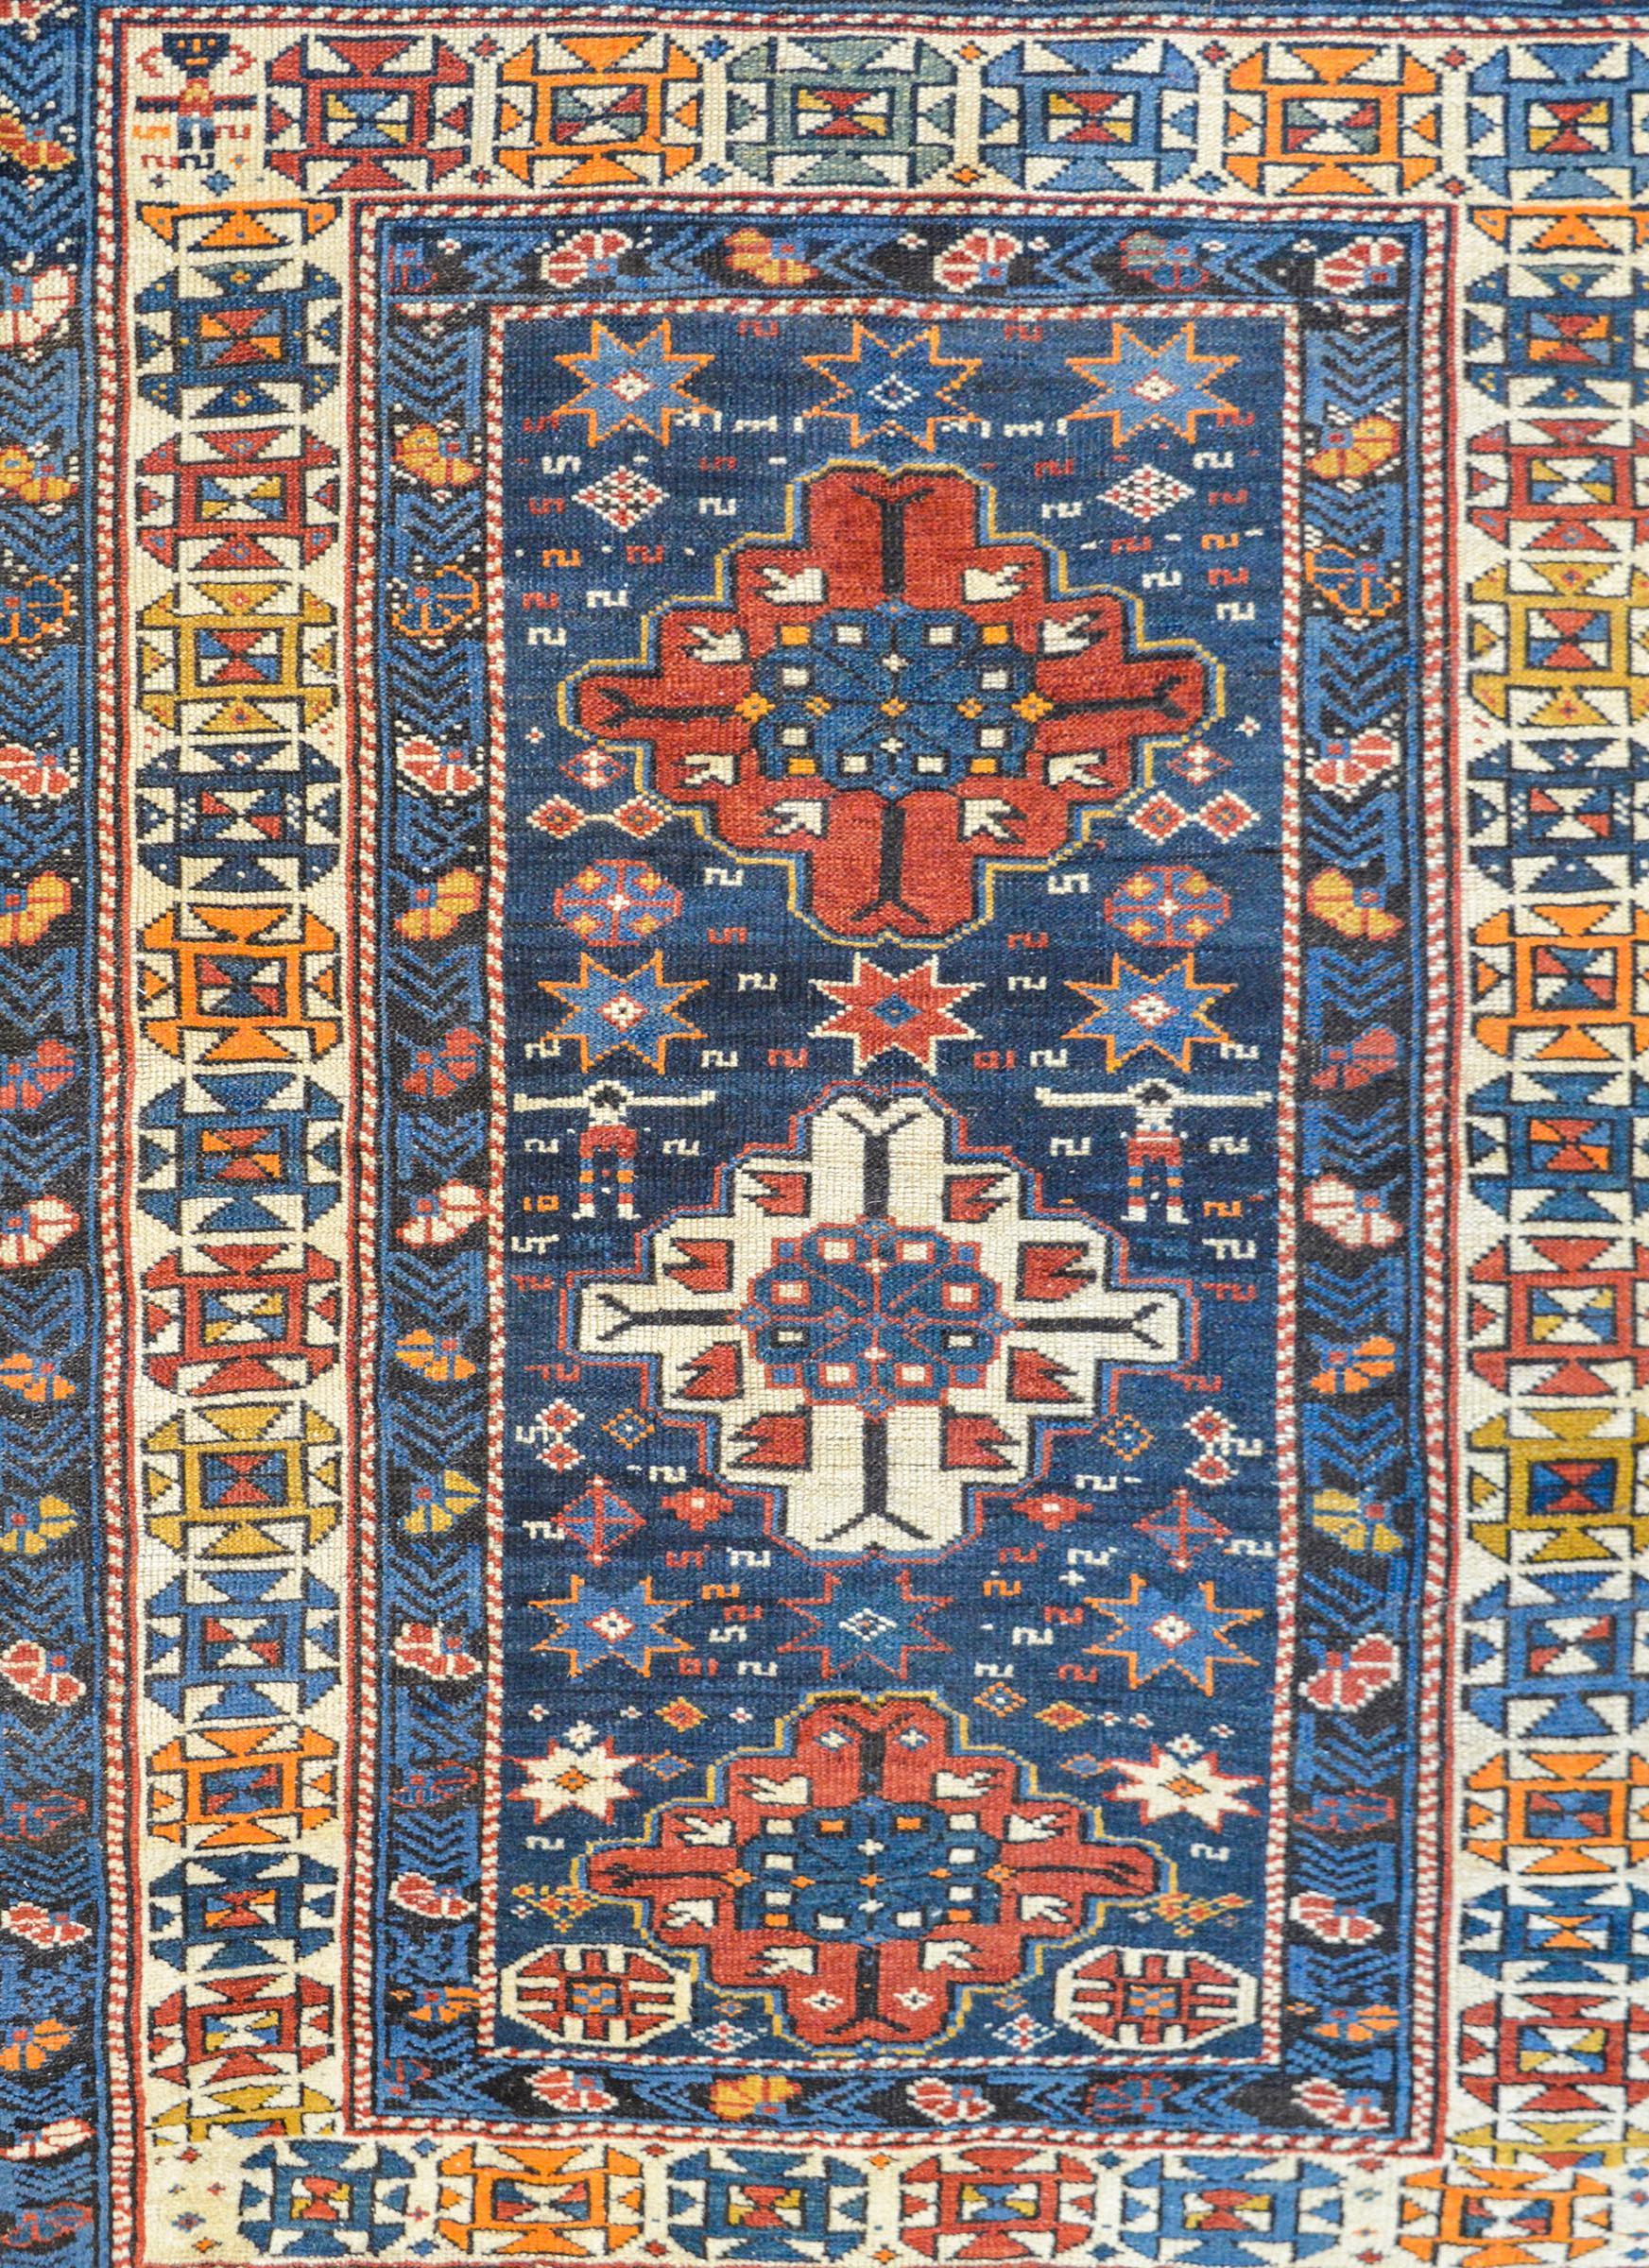 A fantastic early 20th century Azerbaijani Shirvan rug with three diamond medallions, two crimson and one white, on an indigo field of stylized flowers and geometric shapes. The border is exquisite with several stylized floral and vine patterned